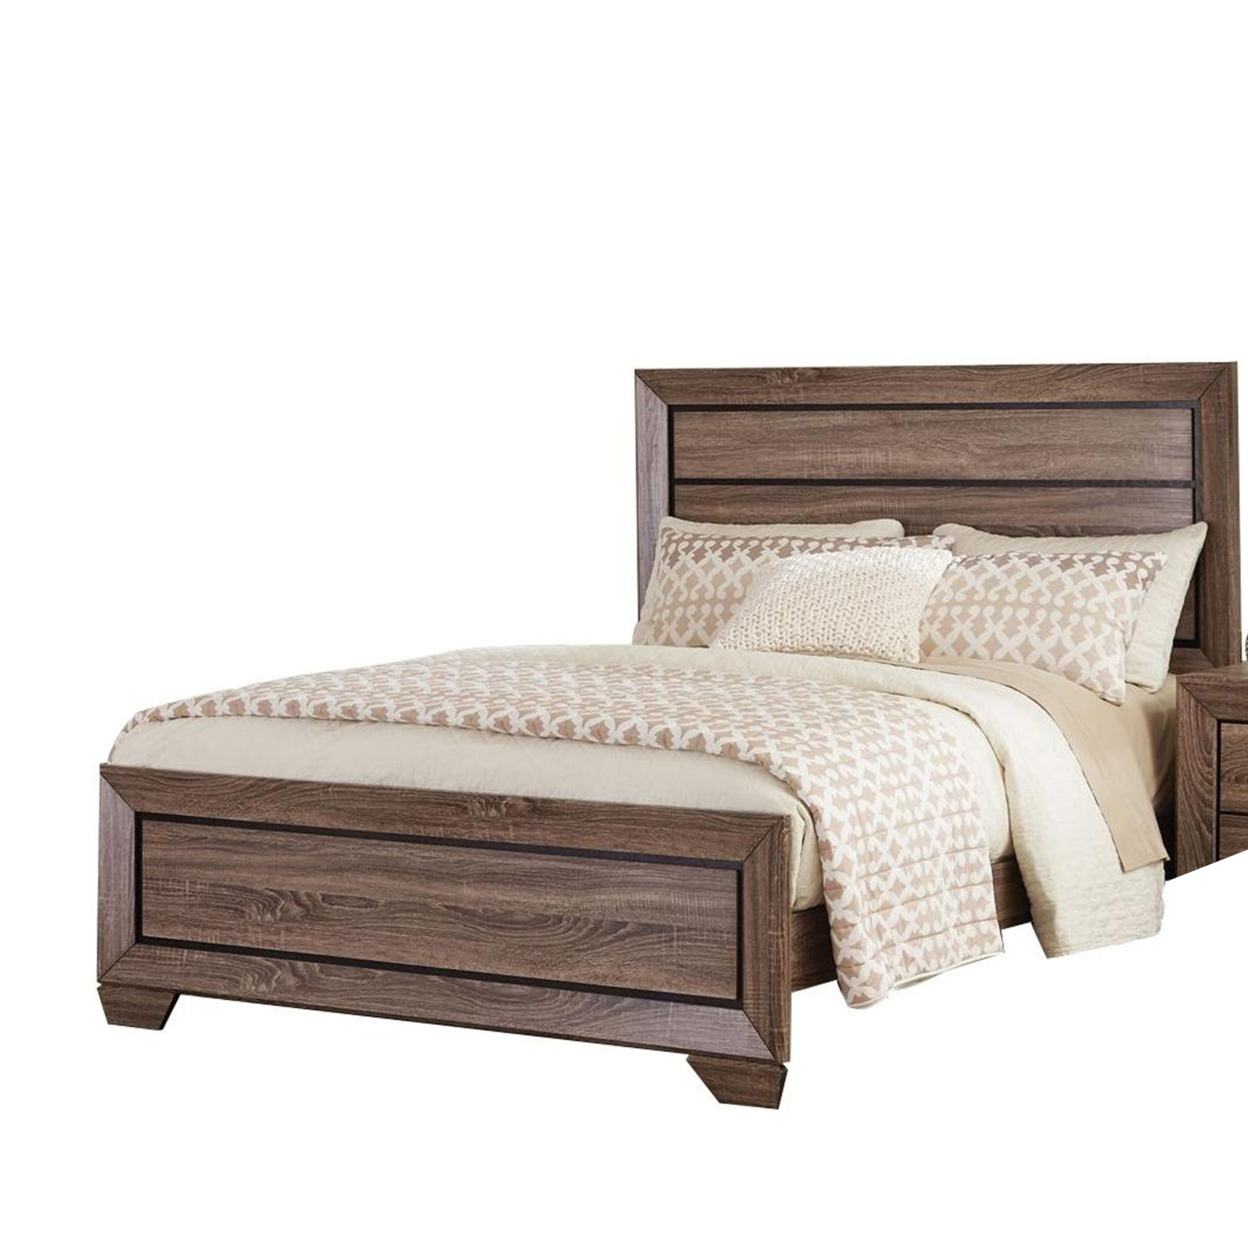 Transitional Style Eastern King Bed With Plank Headboard, Taupe Brown- Saltoro Sherpi